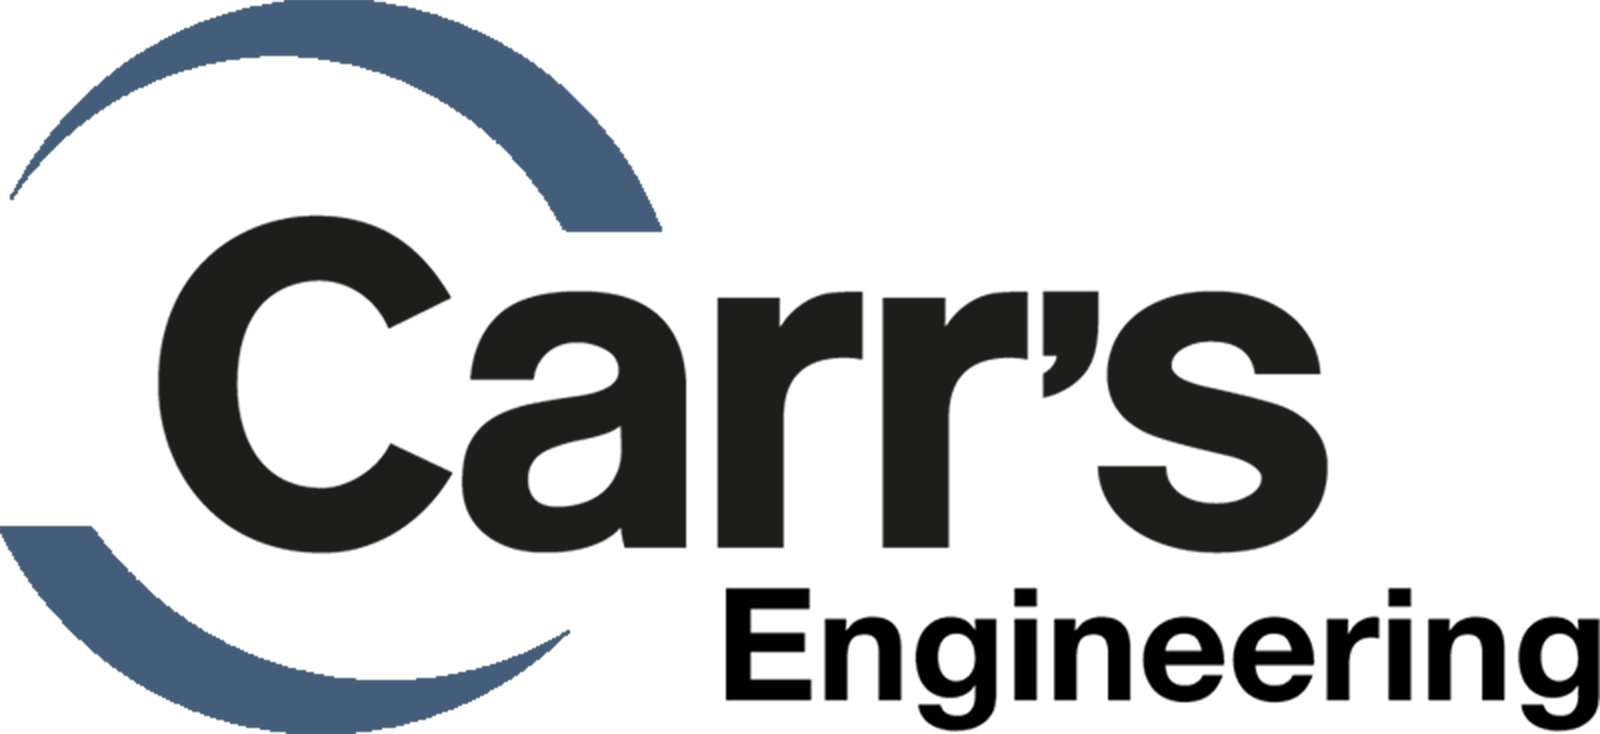 Carr's Logo - Carrs Engineering